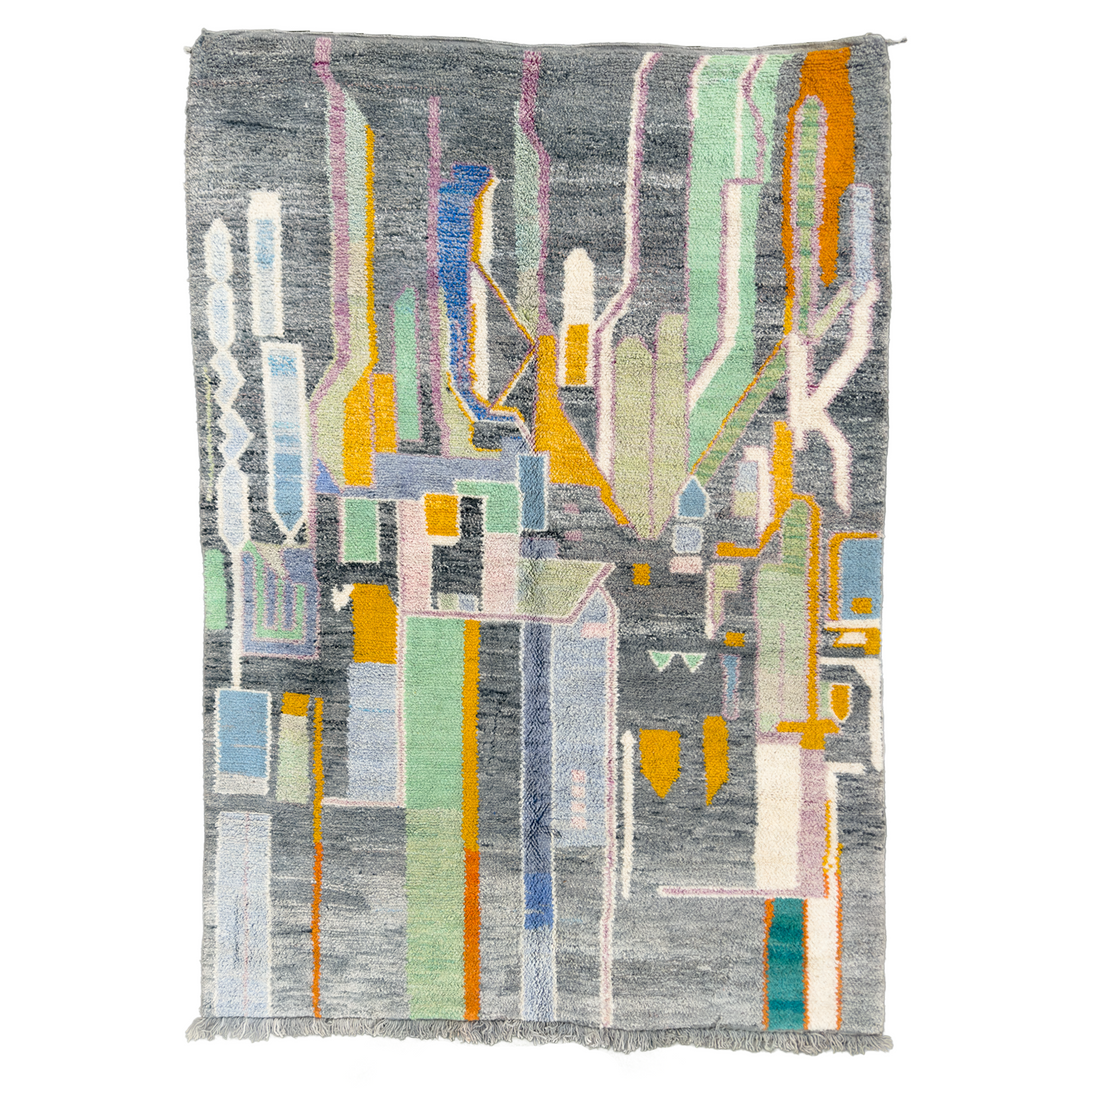 Elevate your space with Miro Gris, an eclectic and maximalist Boujad rug. Handcrafted with plush wool, this Moroccan masterpiece features an intricate pattern and a vibrant color palette of grey, azul, light blue, light purple, and aquamarine. A luxurious statement piece that adds Moroccan artistry to any room. Available in a generous size of 7&